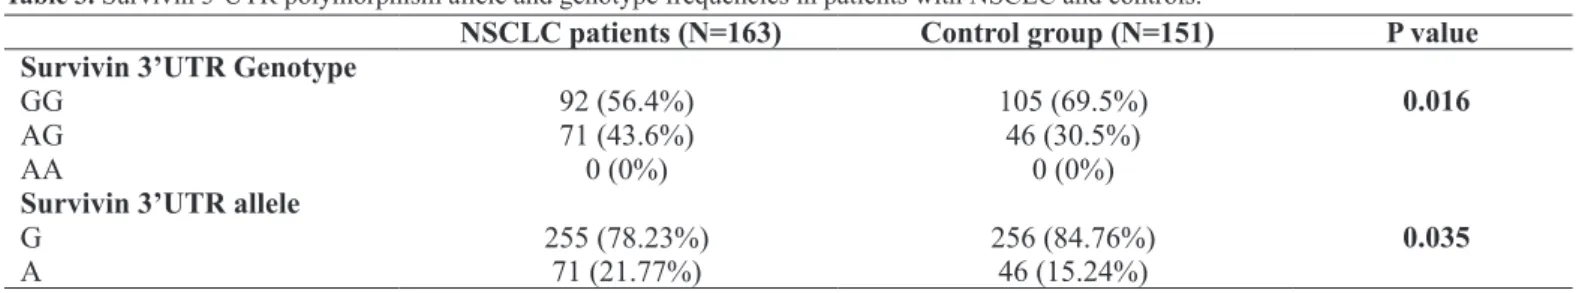 Table 3. Survivin 3’UTR polymorphism allele and genotype frequencies in patients with NSCLC and controls.